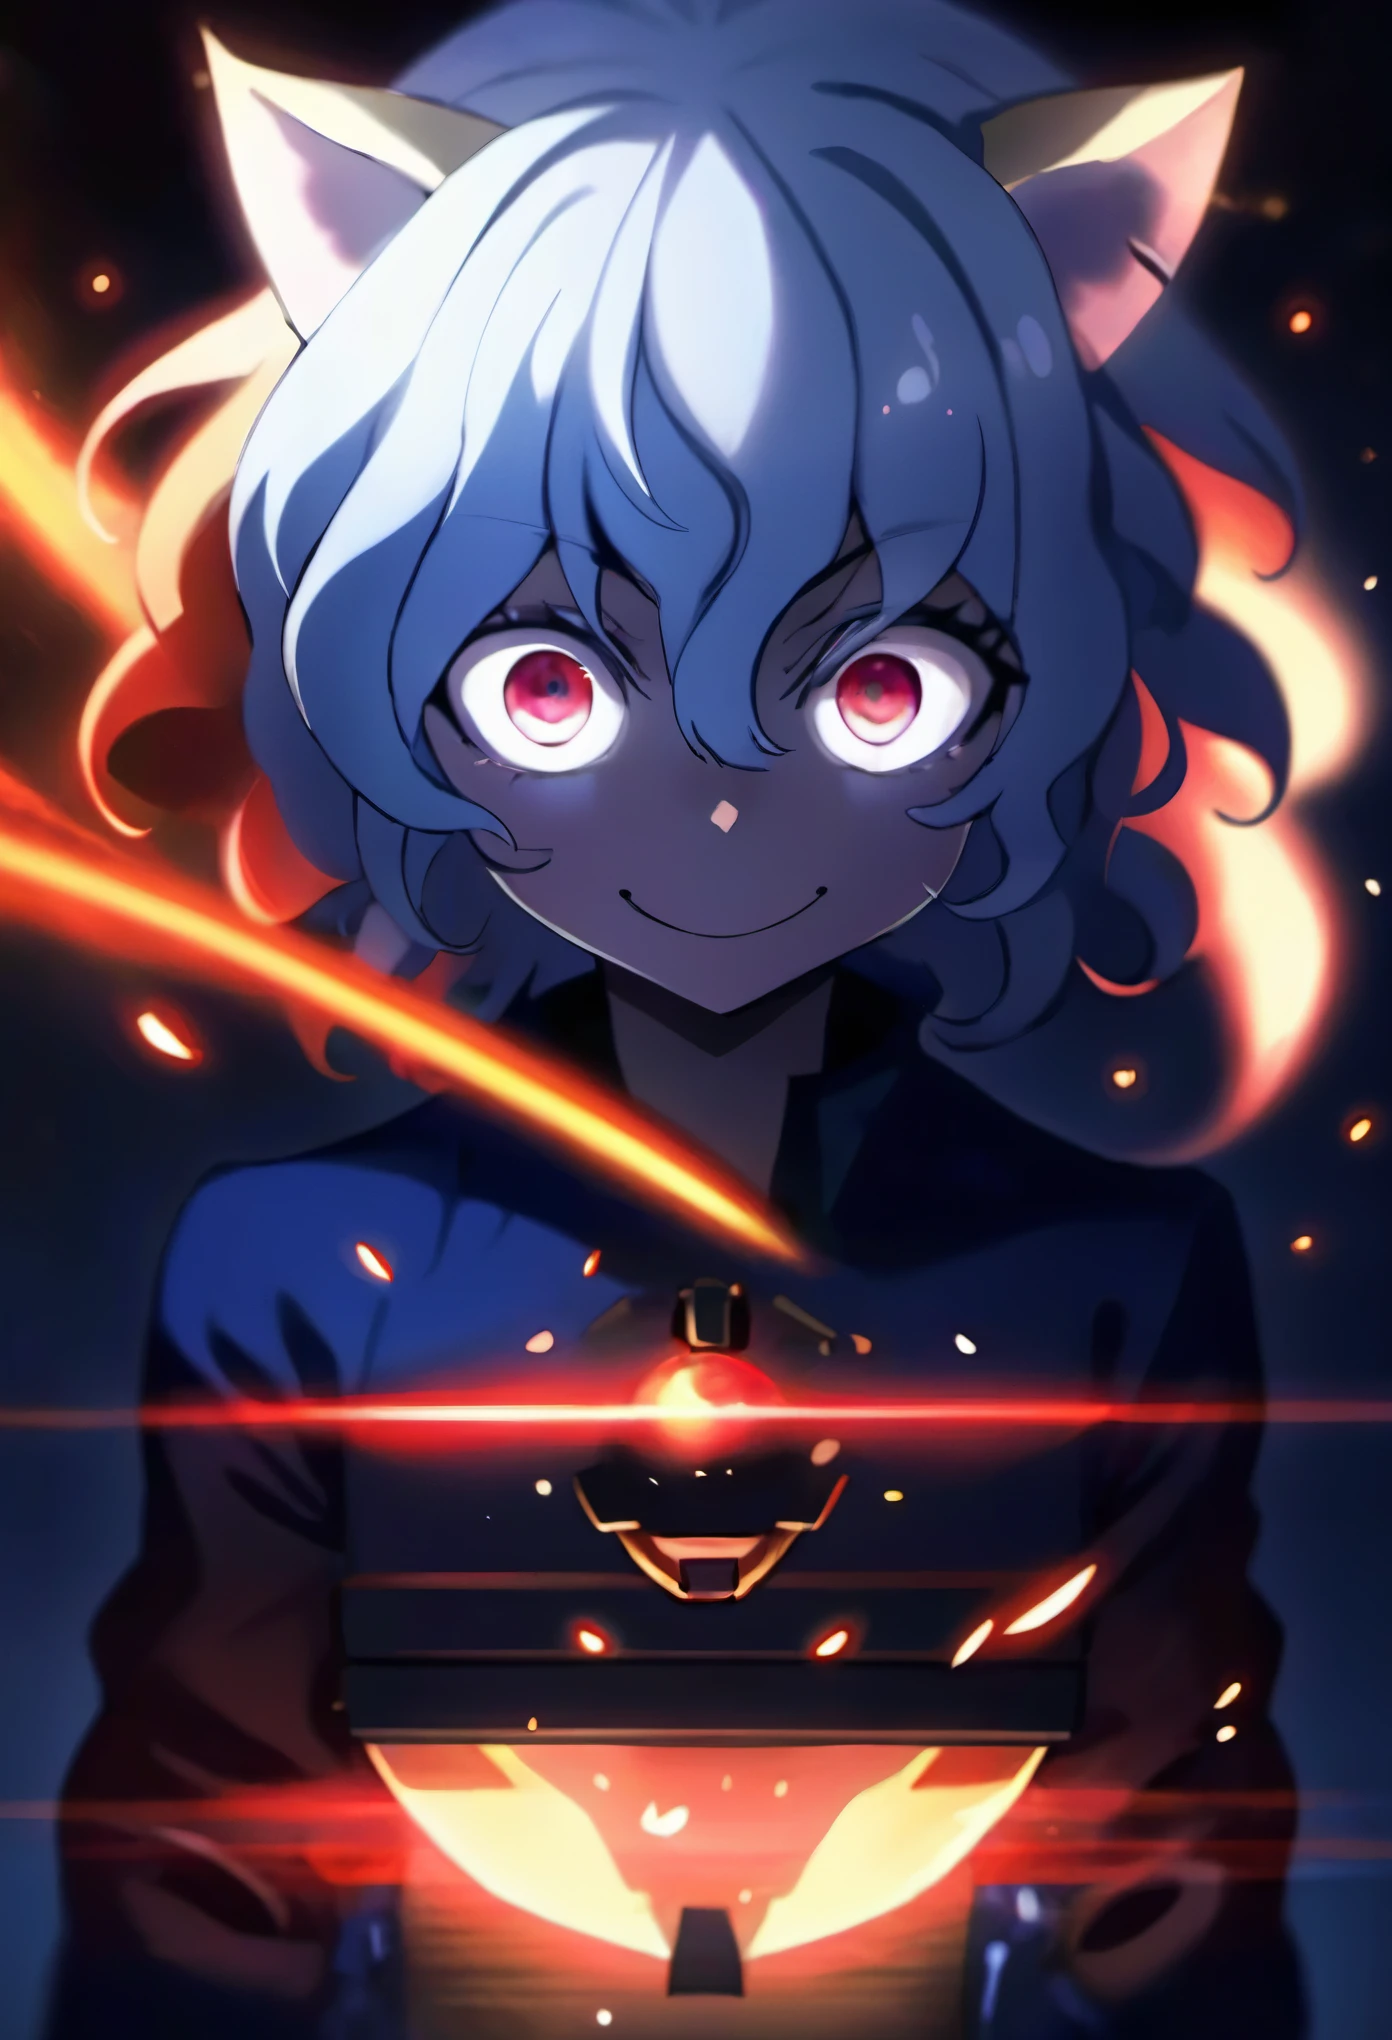 Cowboy Shot, Has red eyes and white hair、Red pupils, Big eyes, Anime characters holding strings, neferpitou, Cat ear, Muffett in the undertail, Devil Anime Boy, Official Art, Devil Boy, High quality fan art, With eyes that glow red, From desire, Official Fan Art, Detailed fan art, Favorite character, Official Artwork, Navy blue jacket, Brown trousers, laughing, boy, Fluid art, (High resolution), (Sharp focus), (Realistic:1.37), (Physically Based Rendering), (Very detailed explanation), (Professional), (Vibrant colors), (Portraiture), (Soft lighting), (超High resolution), (White Ideal Hair), (Studio Lighting), (Blue street lights), (highest quality, 4K, 8k, High resolution, masterpiece:1.2), (Very detailed), Flowing, Shimizu, Creepy Smile, pixiv masterpiece::1.5 ,high detailed,light particles,glitch effect, geometrical pattern,symbol particles,black background, dynamic angle, 